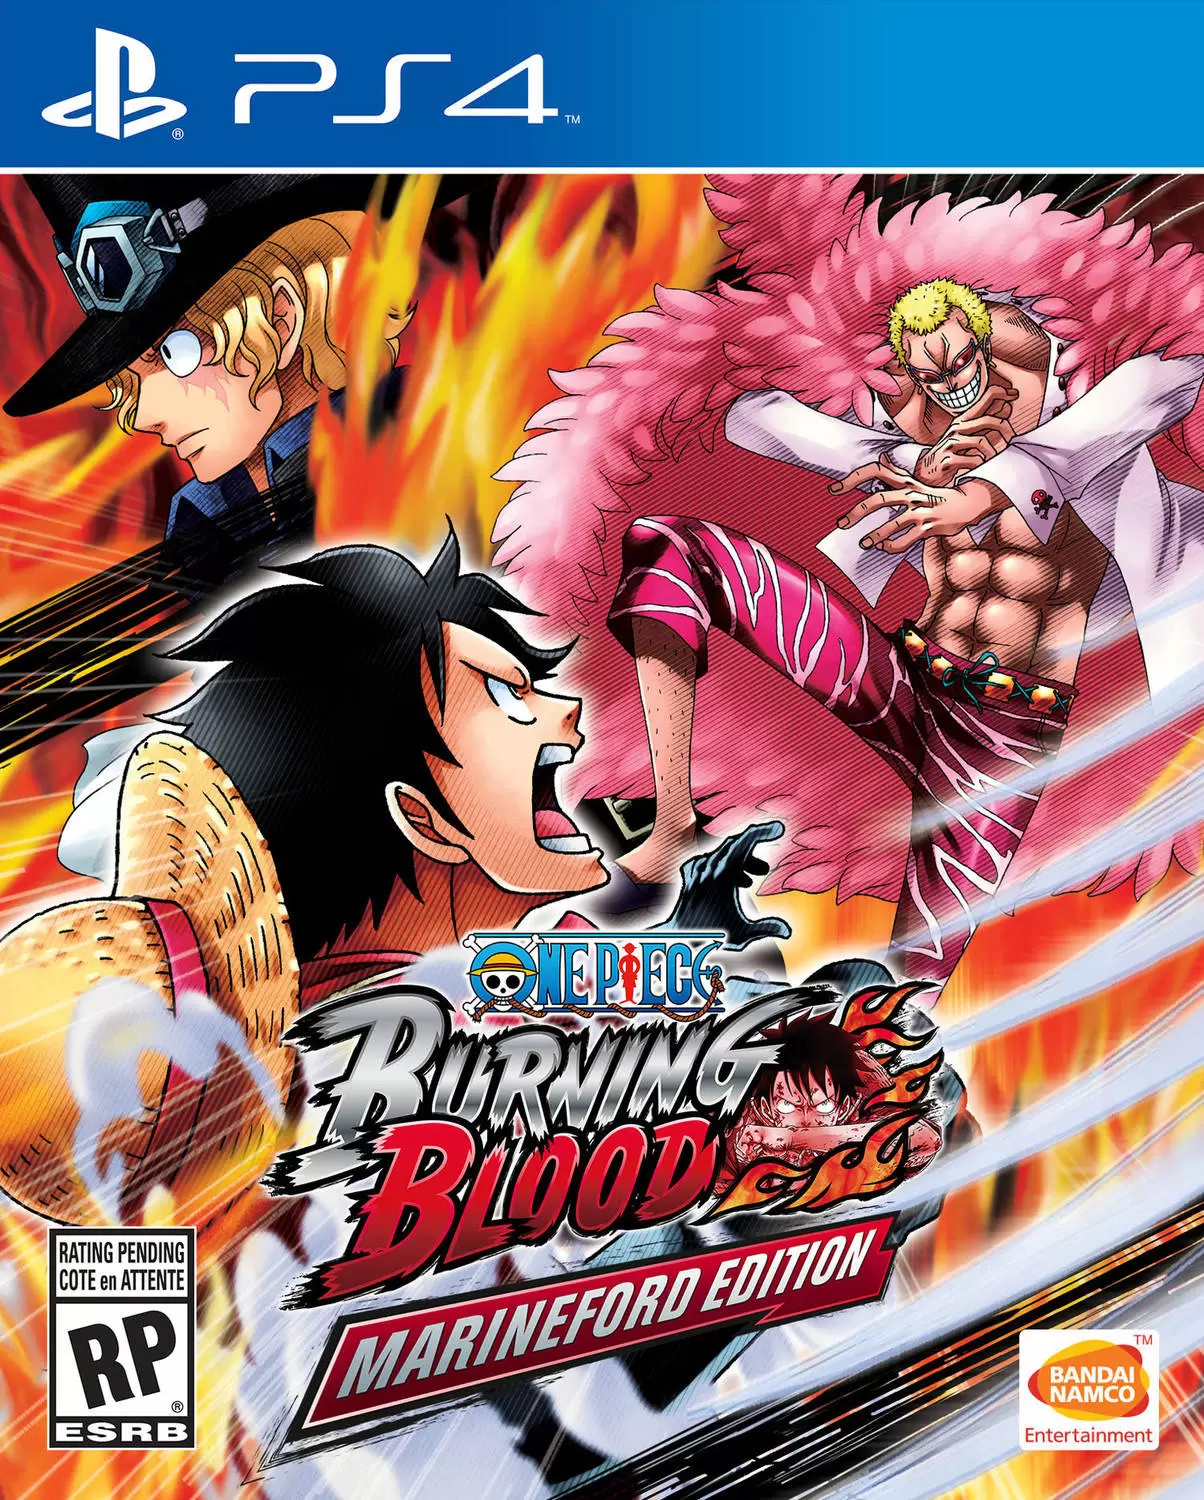 PS4 Games - One Piece: Burning Blood